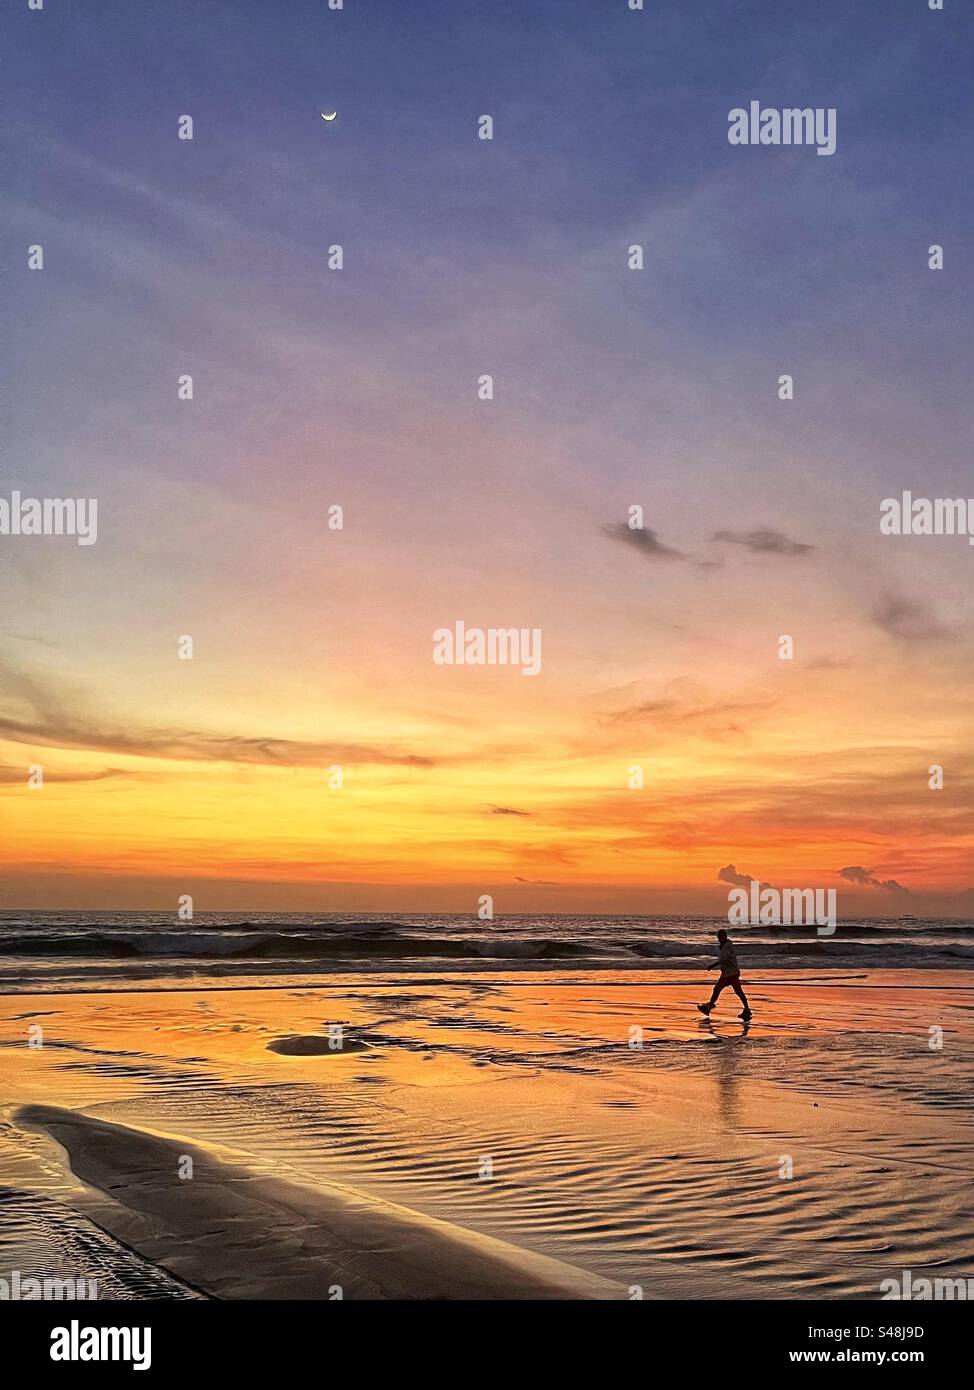 Man walking at sunset on the beach in Seminyak Bali silhouetted against the sea and the orange glow in the sky Stock Photo